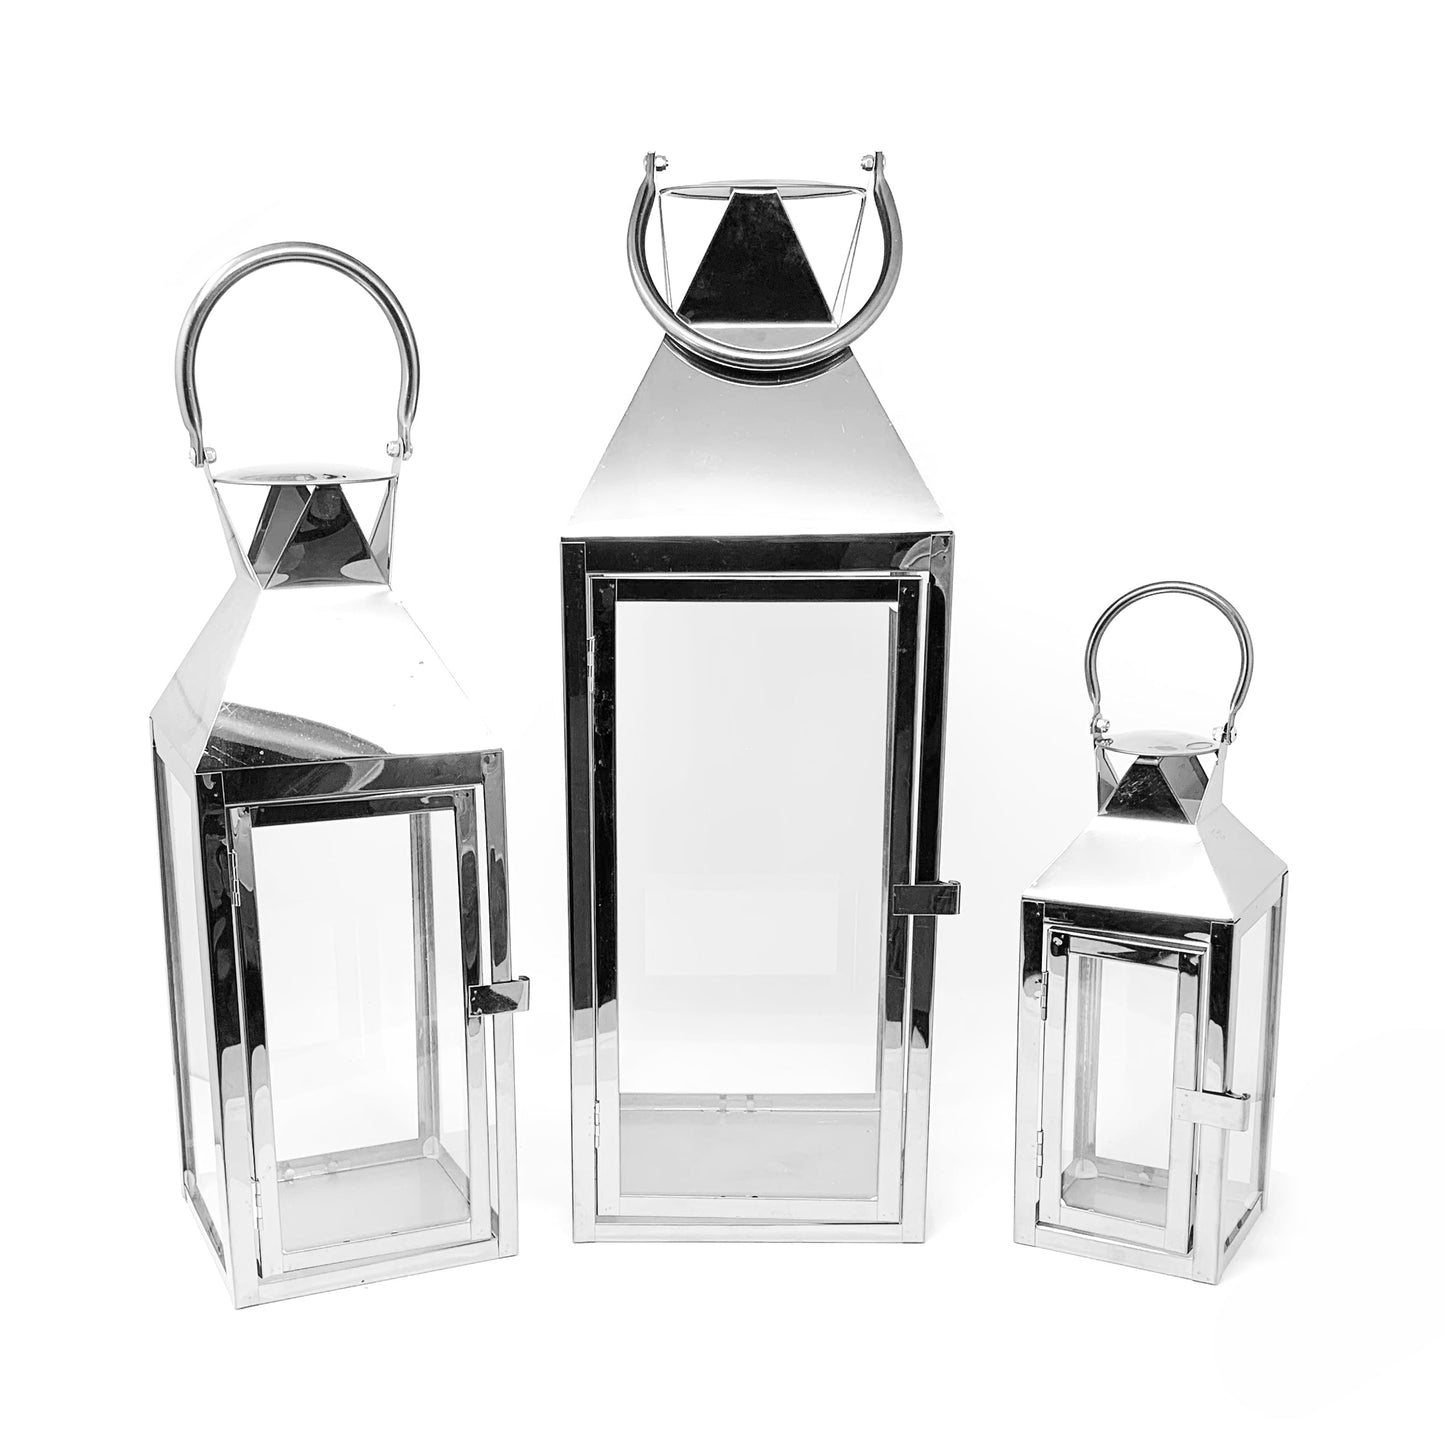 Allgala Lanterns 8 SET 3-PC Set Jumbo Indoor/Outdoor Hurricane Candle Lantern Set with Chrome Plated Structure and Tempered Glass-Pyramid Top